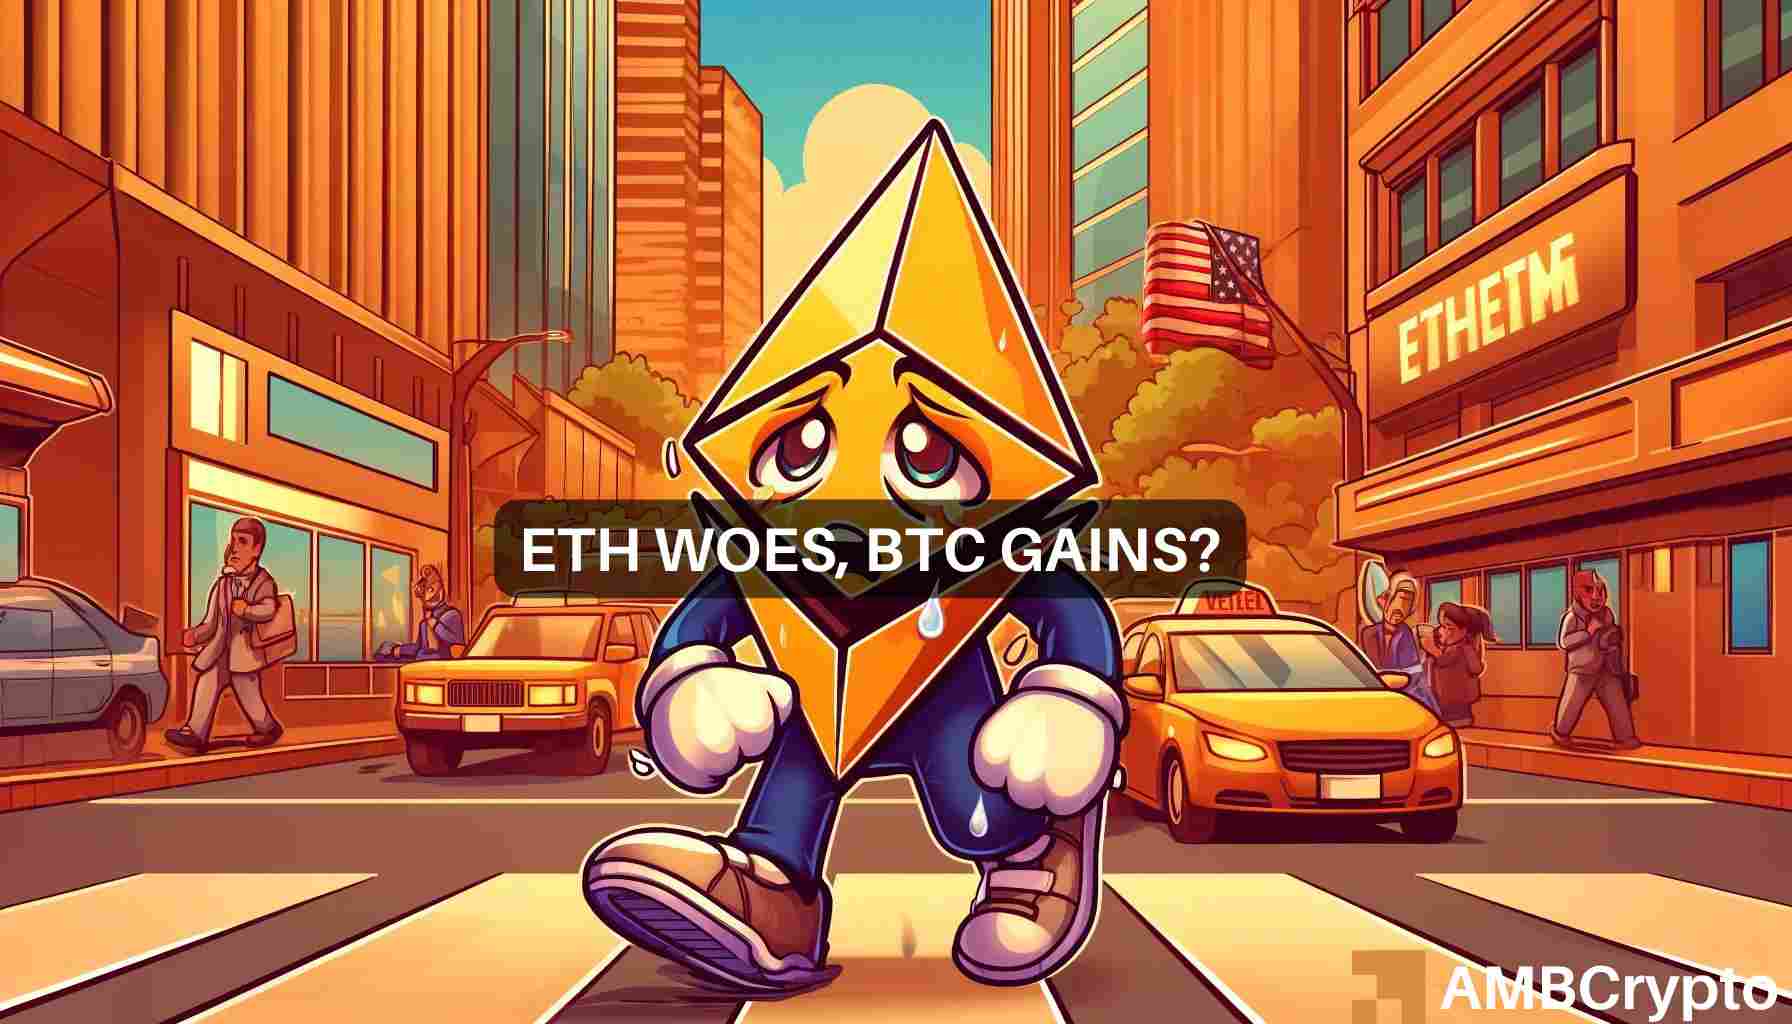 Ethereum headed to ‘the grave’ if SEC rejects ETH ETFs, say analysts